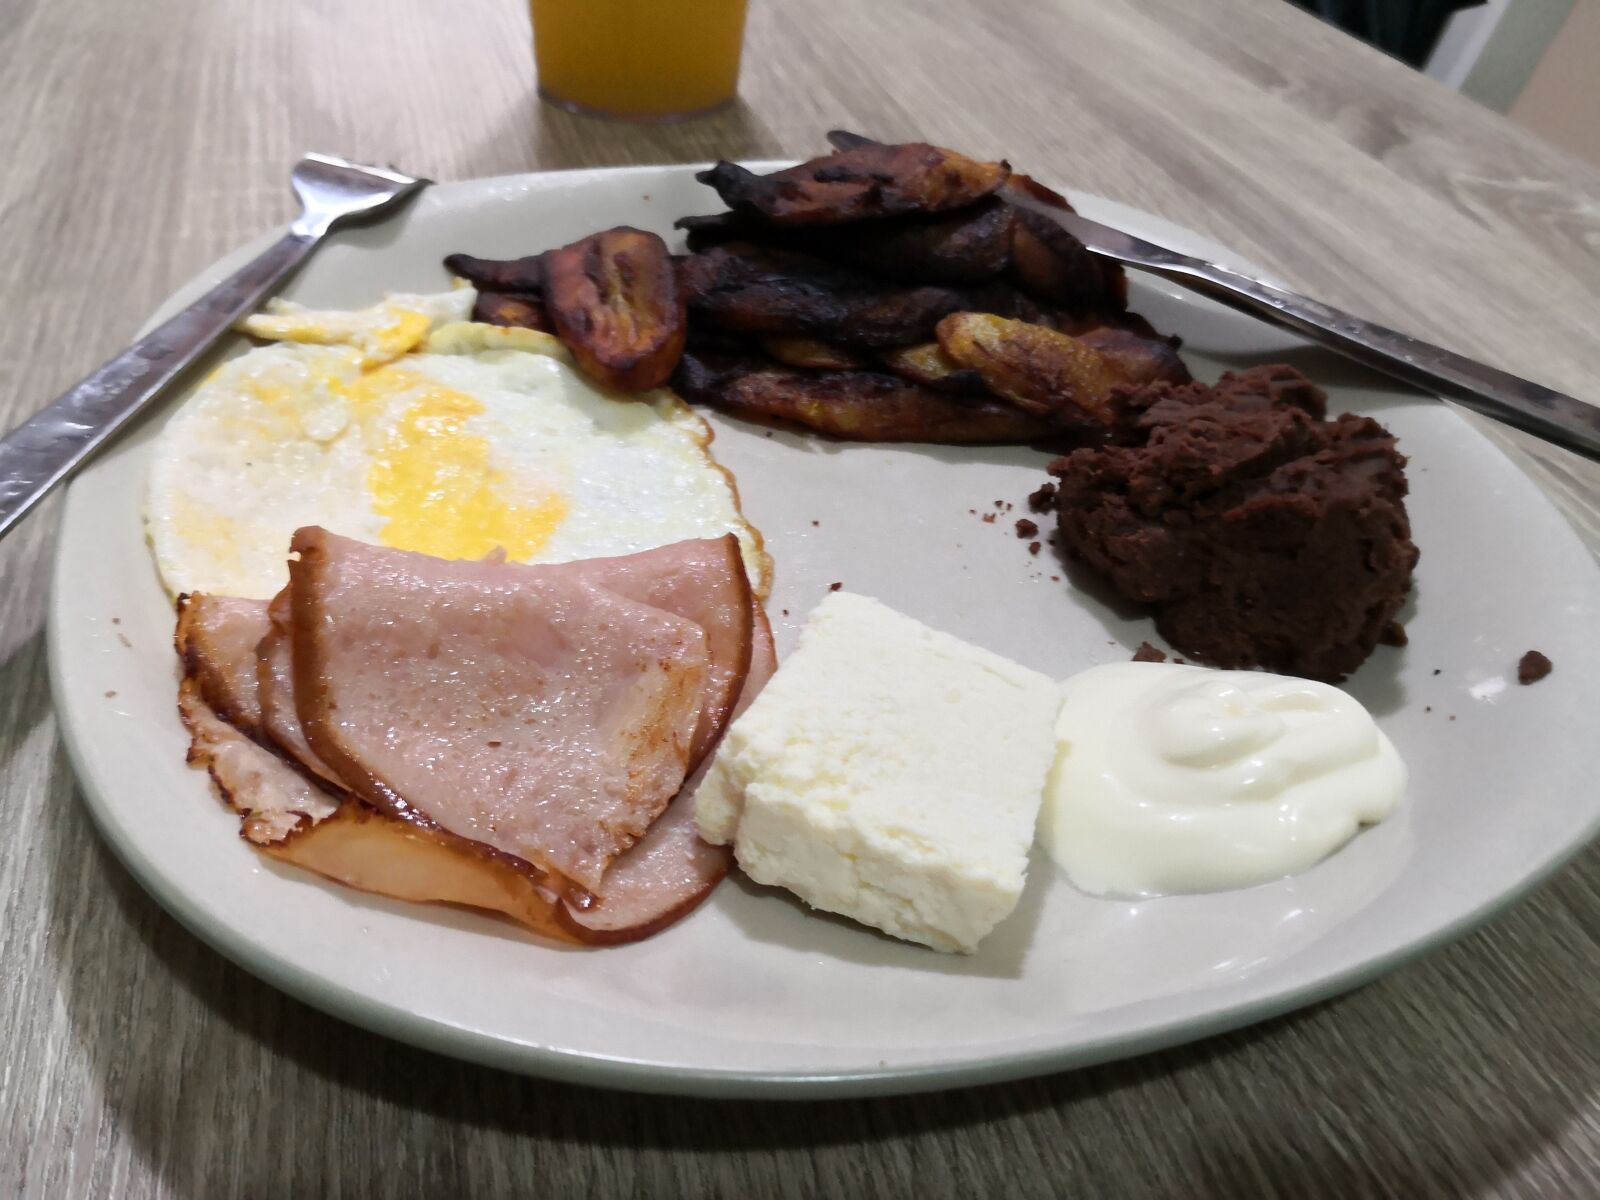 HUAWEI Mate 10 Pro sample photo. Food, cook, breakfast photography